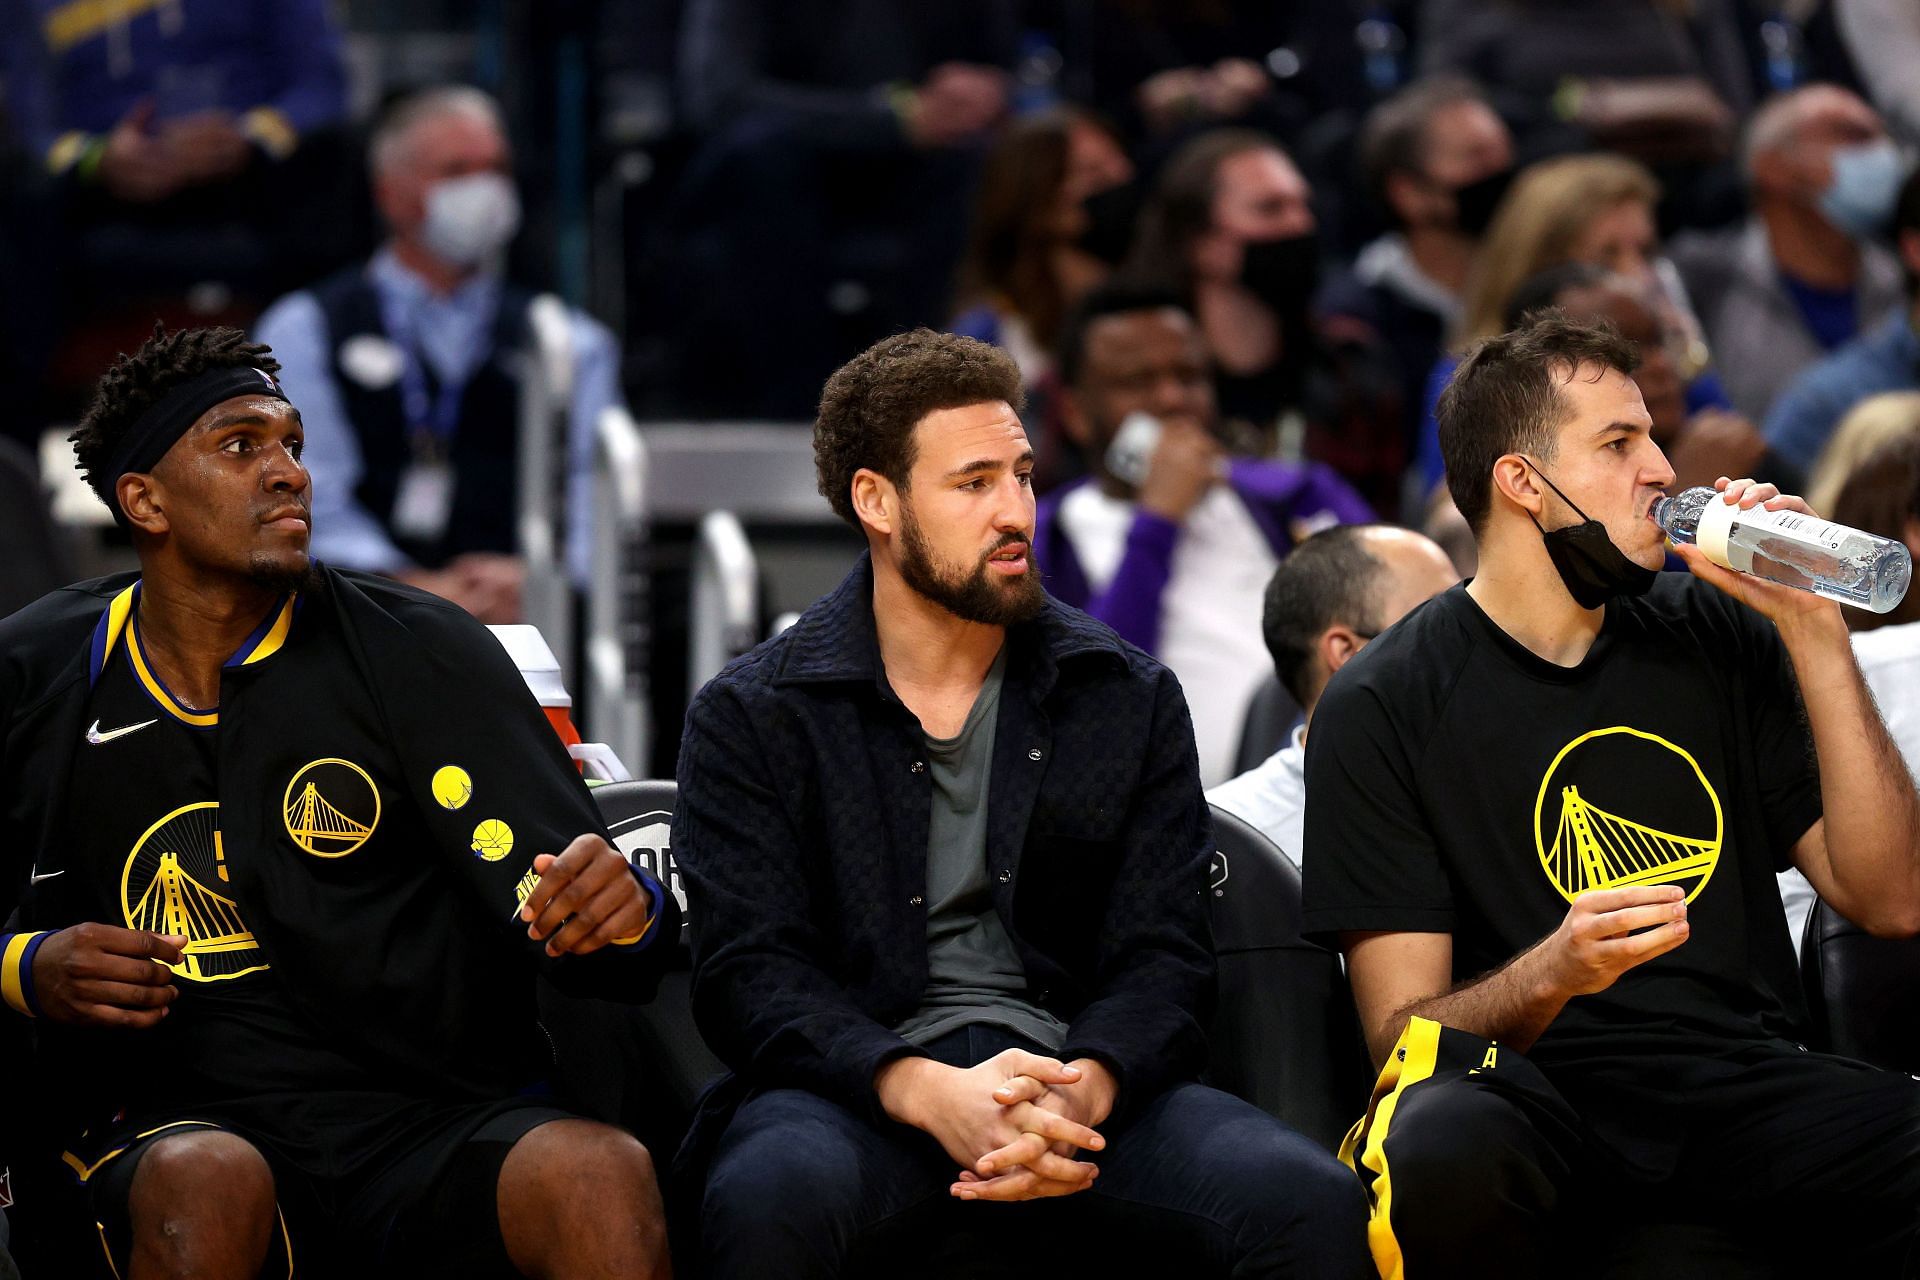 Klay Thompson (middle) of the Golden State Warriors on the bench